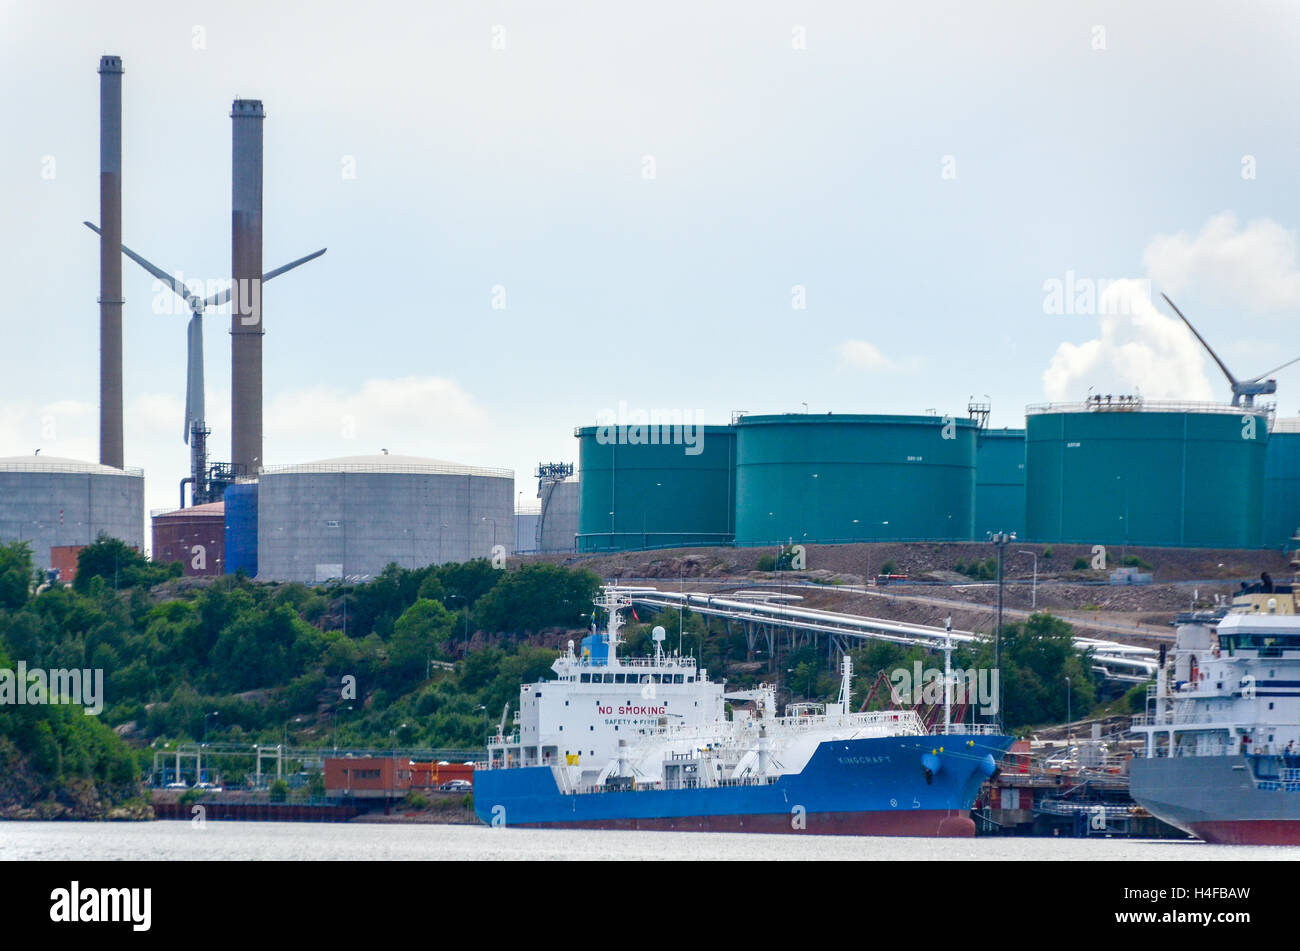 Preemraff Lysekil oil refinery and terminal, Sweden Stock Photo